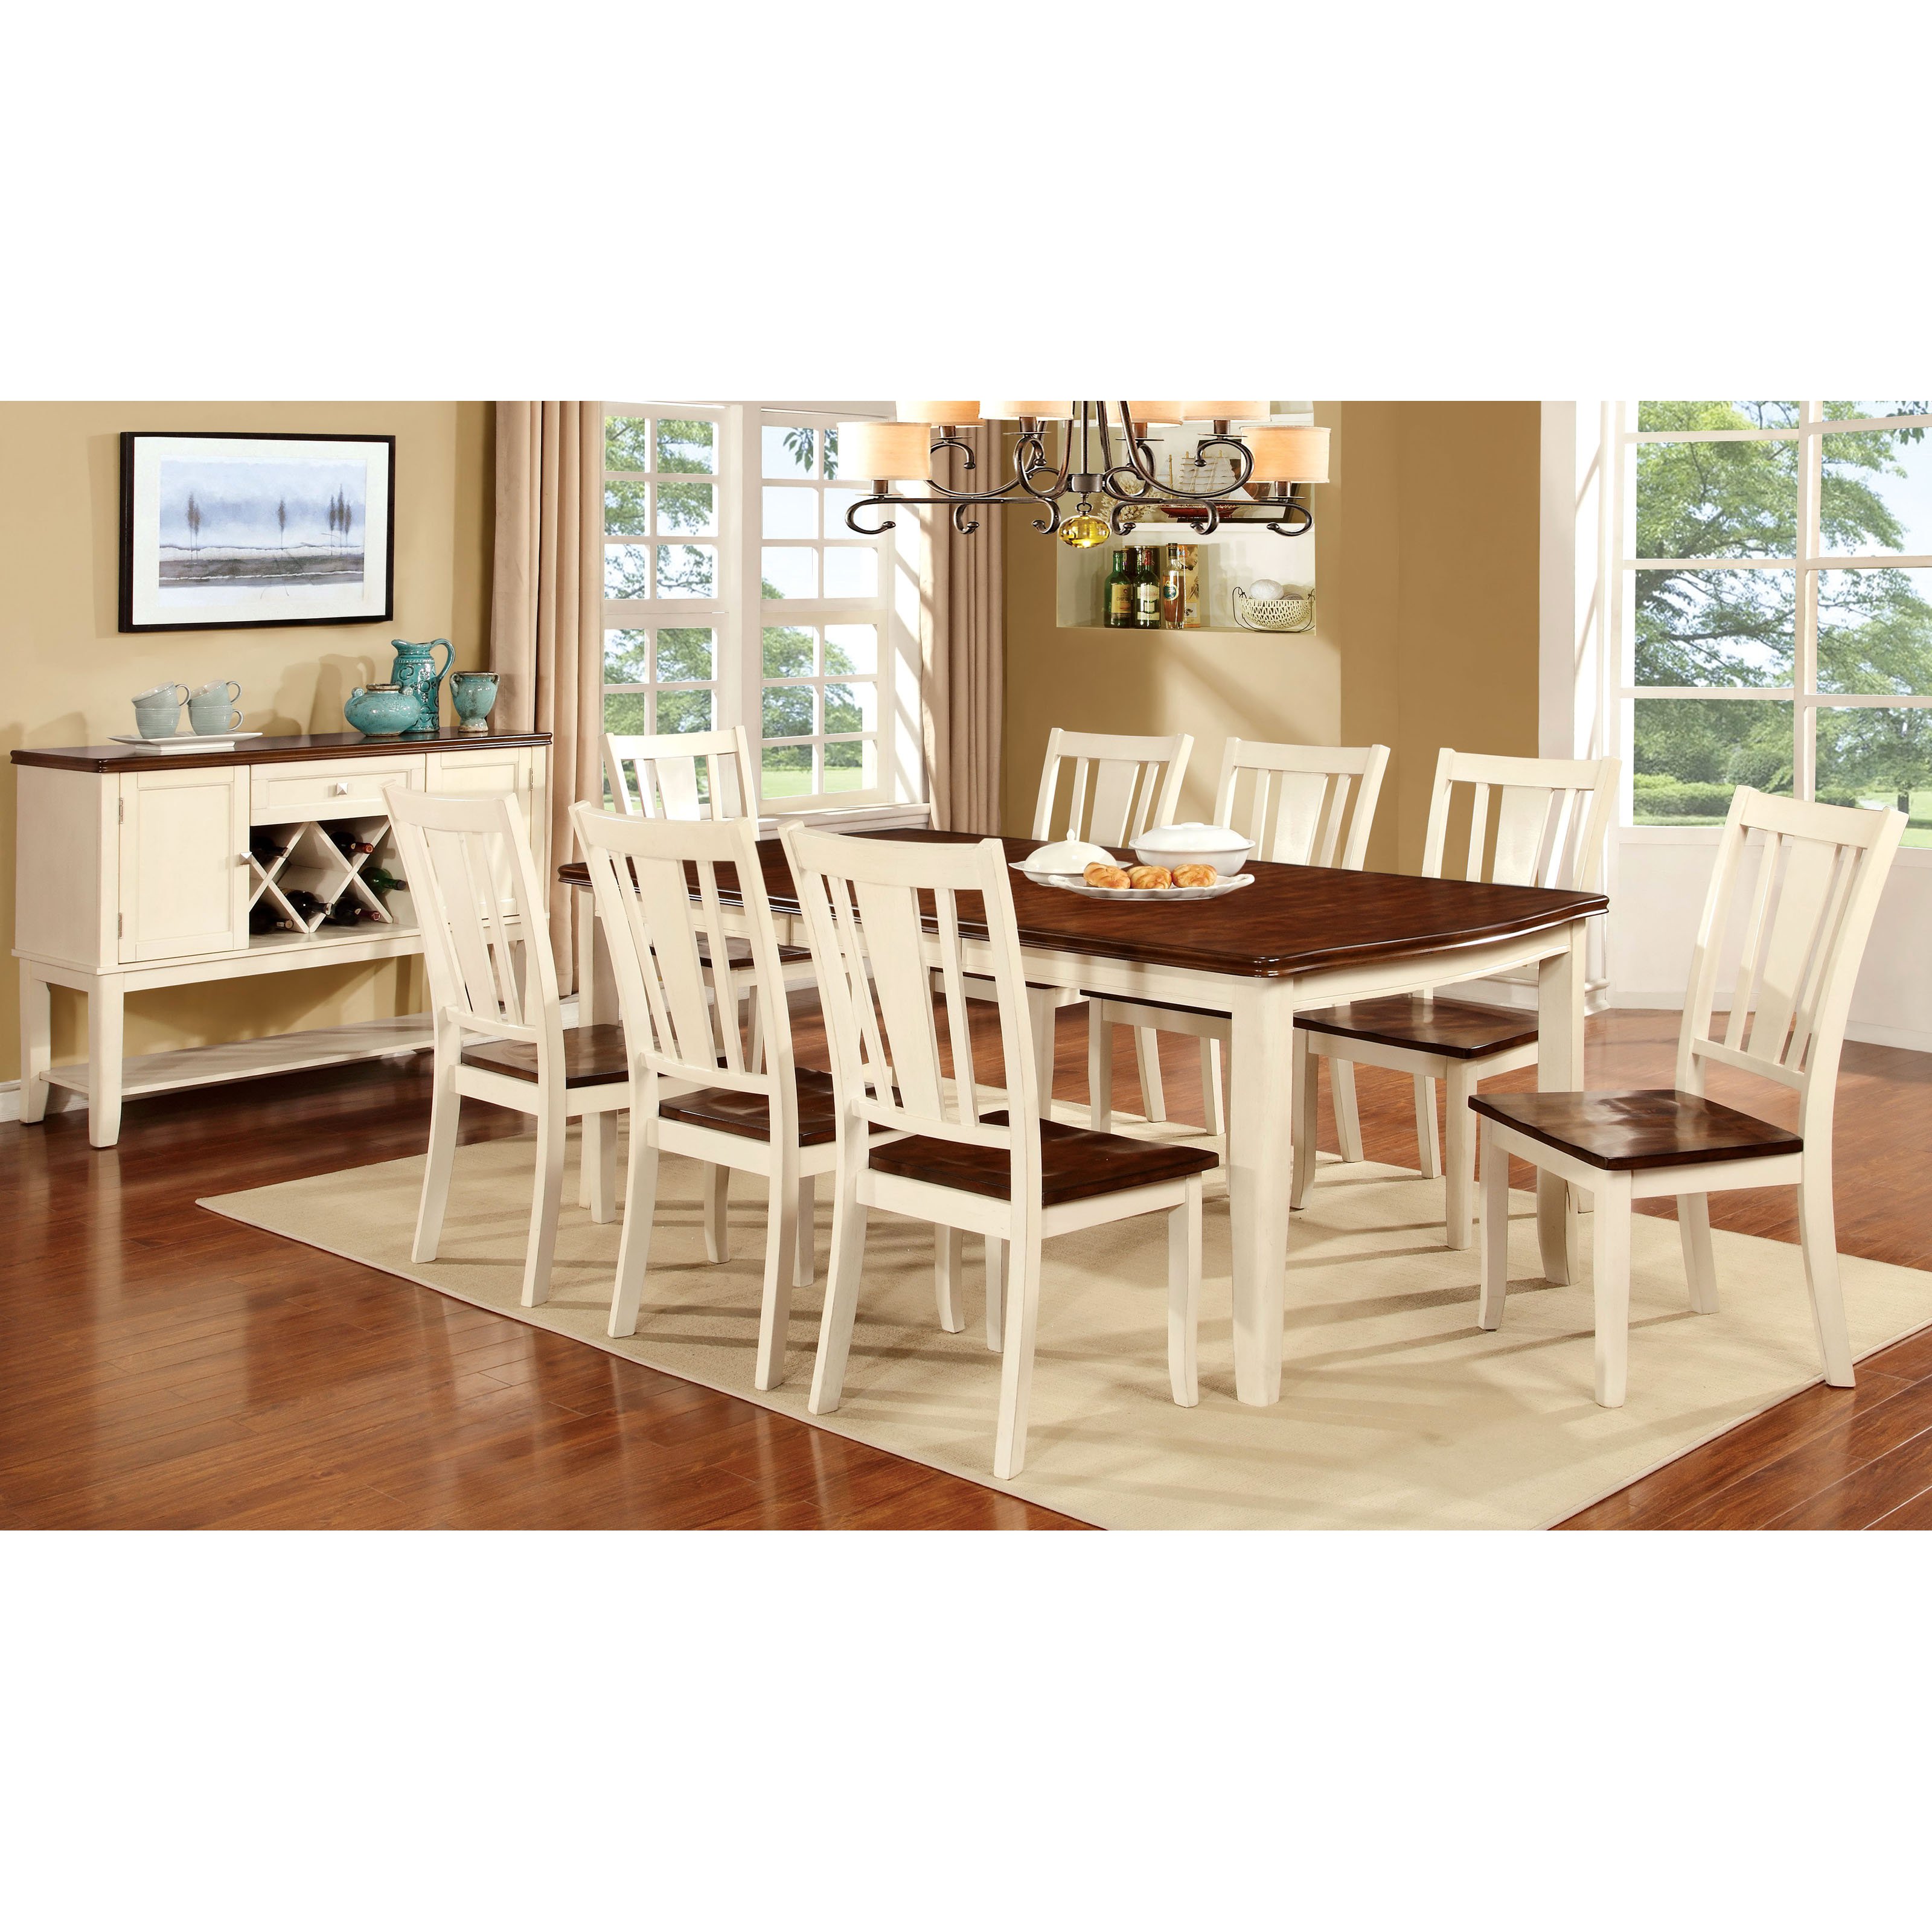 Two Tone Dining Table Amazing Furniture Of America Lohman 9 Piece ...